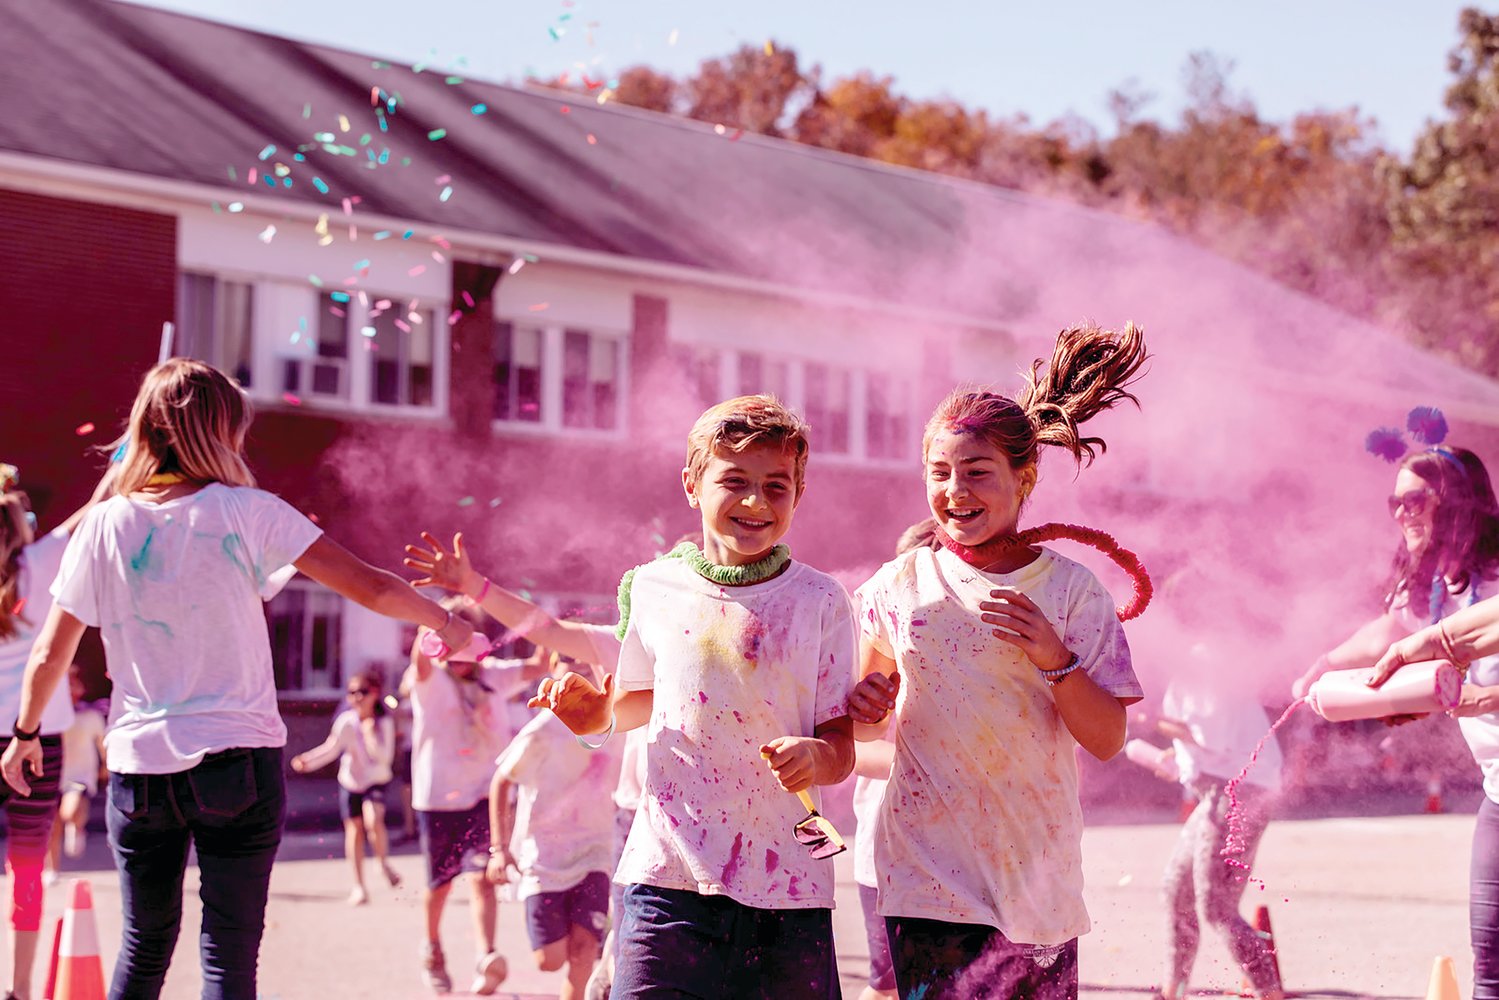 Students Jean and Lily have fun during the Colorthon event at Our Lady of Mercy School.